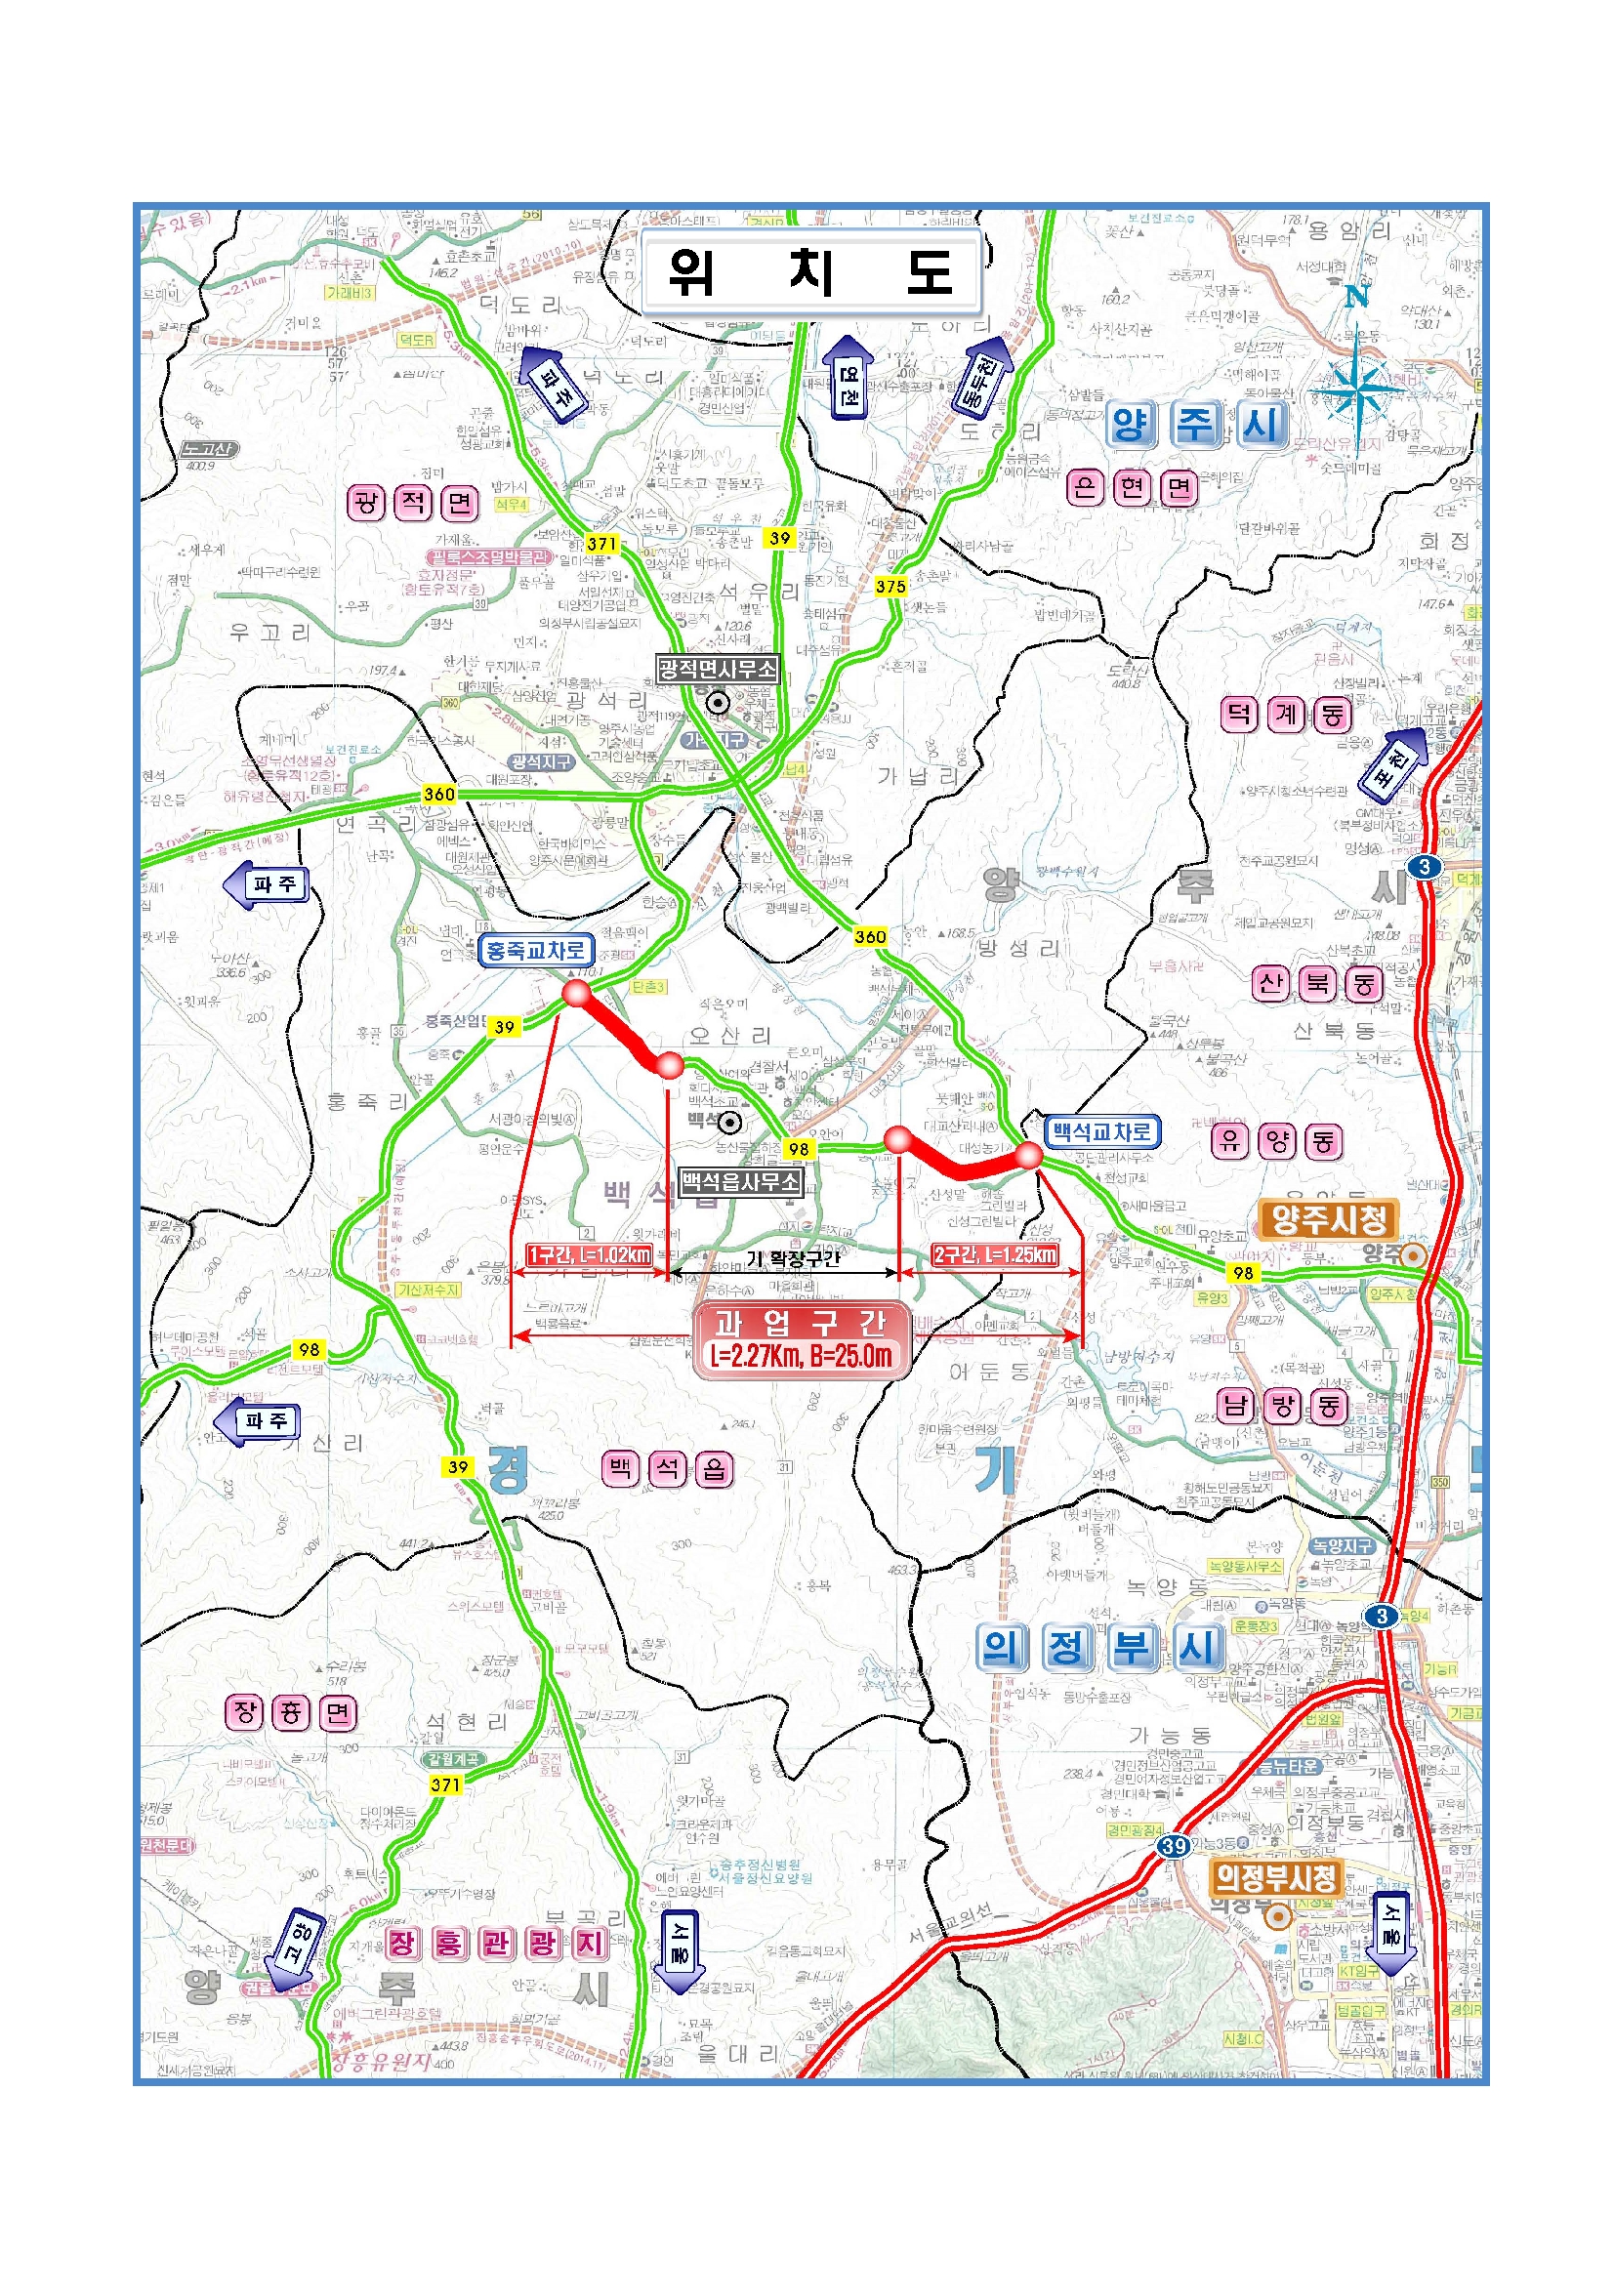 Detailed engineering design service for National Route 98 (Baekseok-Danchon) alignment improvement project